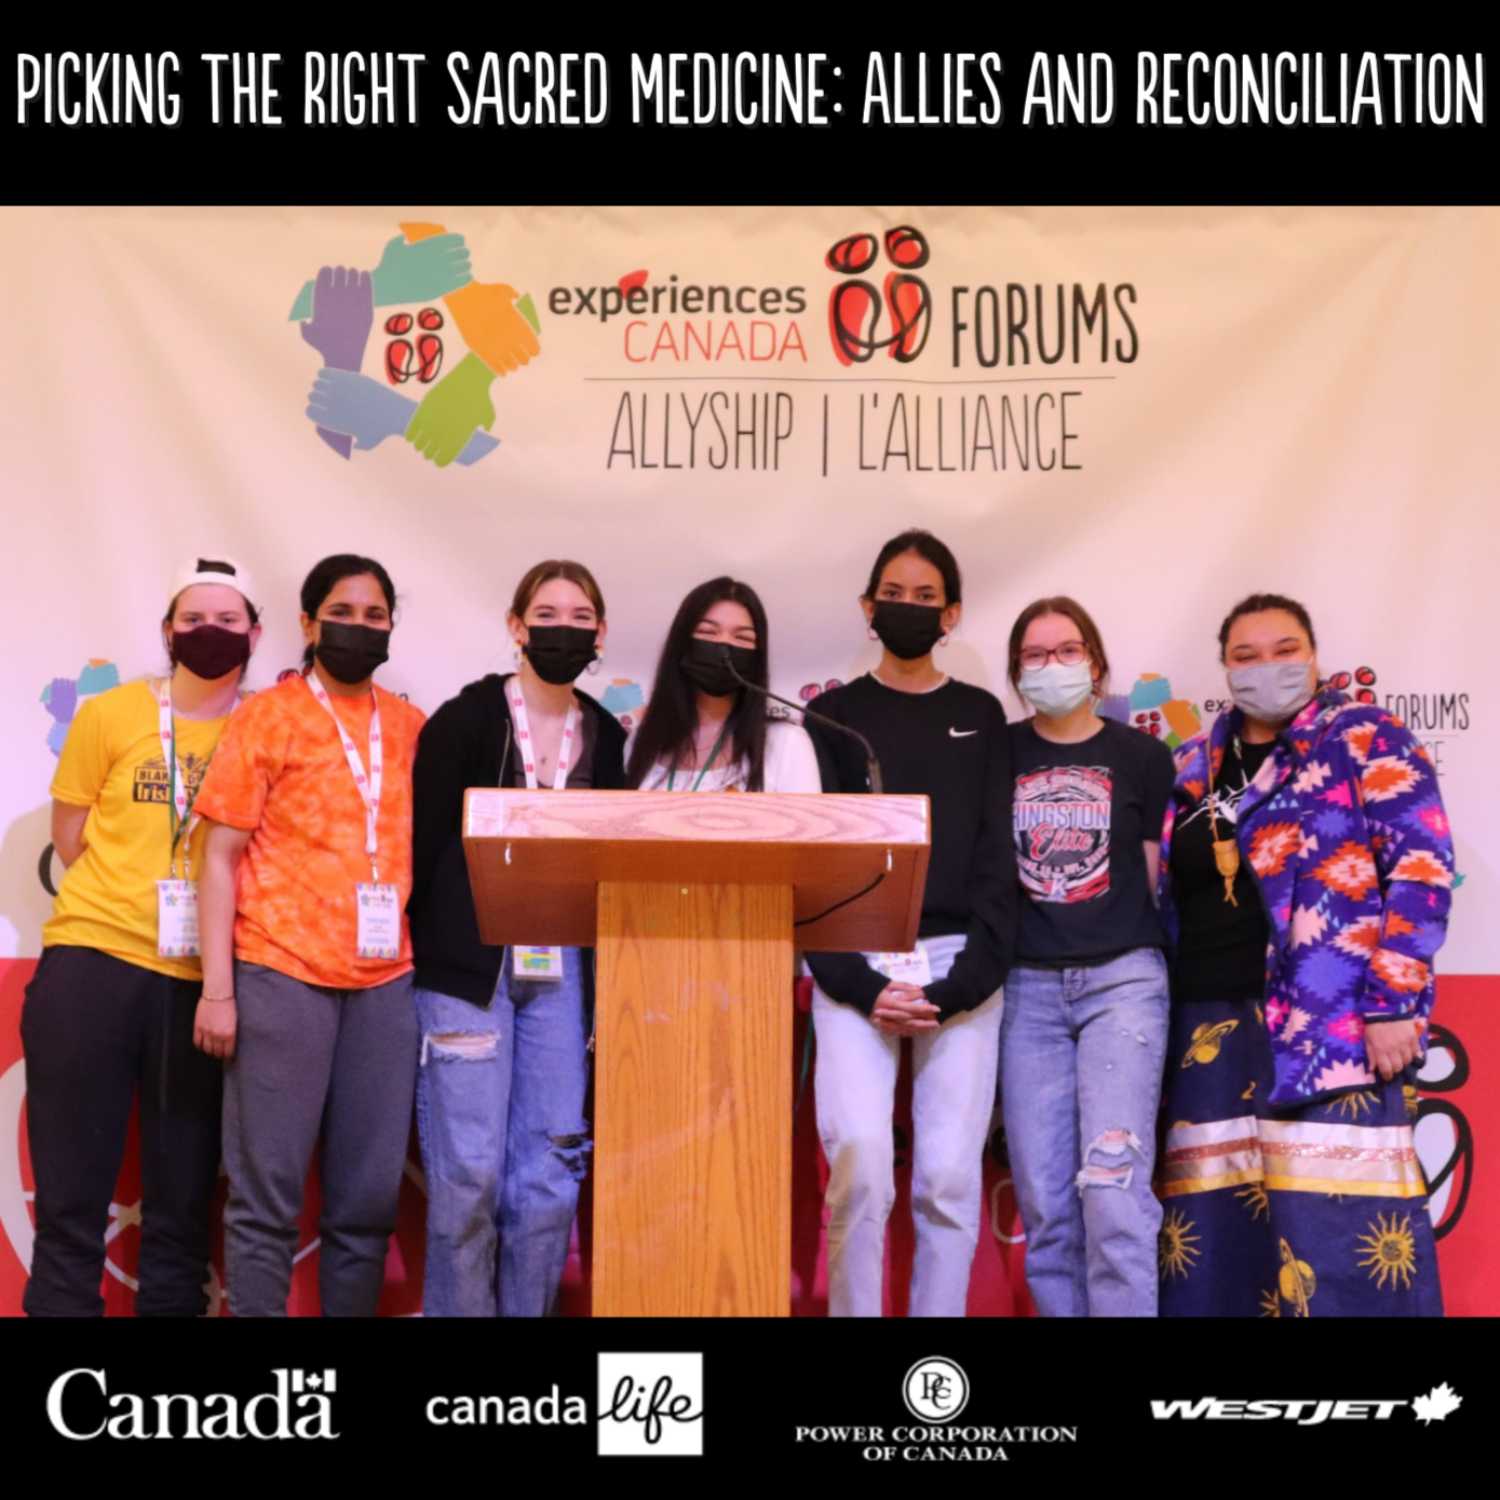 Picking the Right Sacred Medicine: Allies and Reconciliation